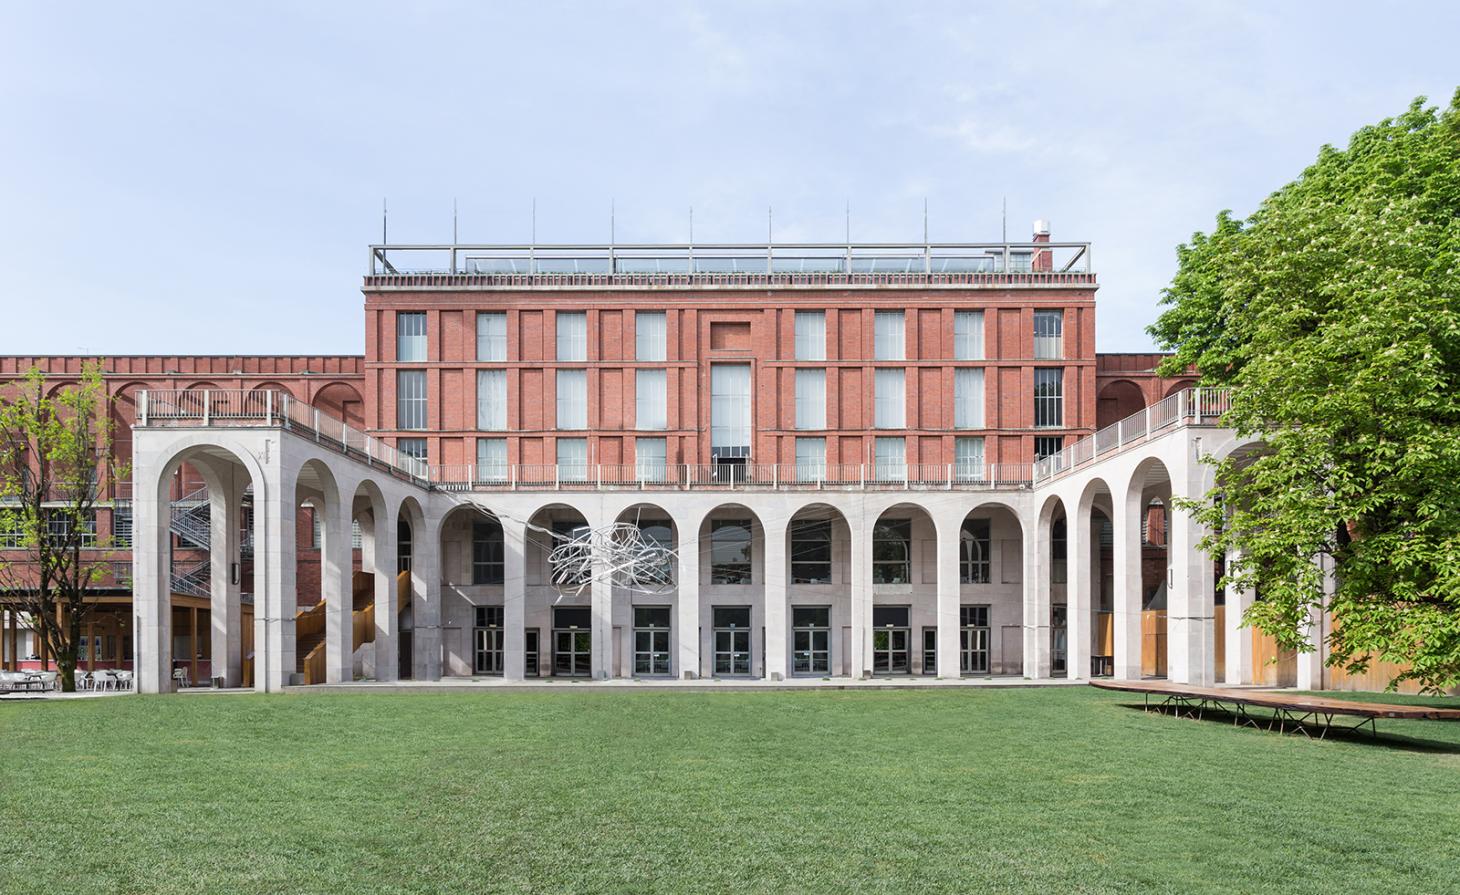 Milan Design Week 2021 - Salone del Mobile Returns With A Special Curation